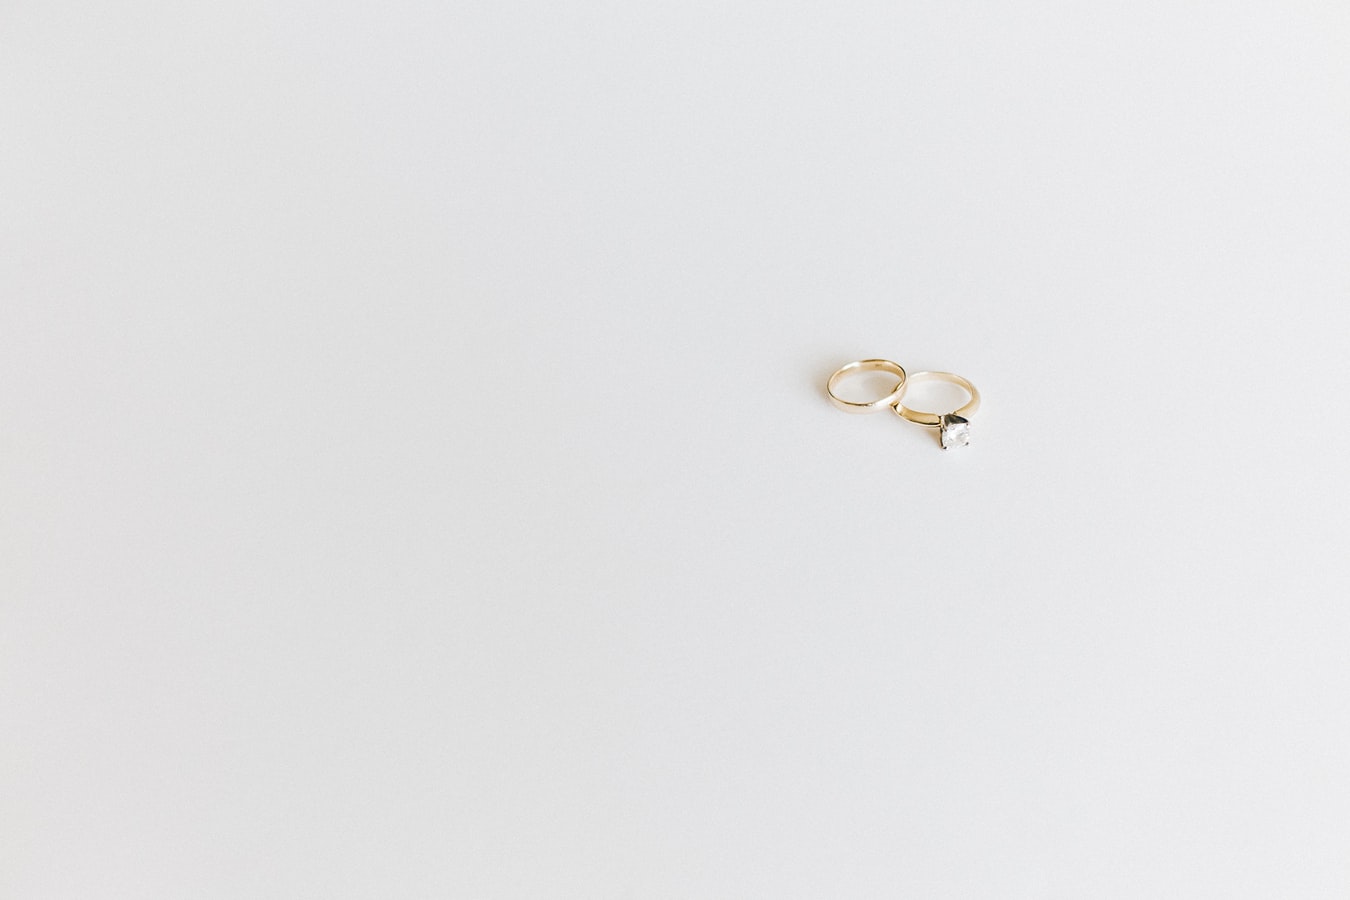 Two gold wedding rings on white background